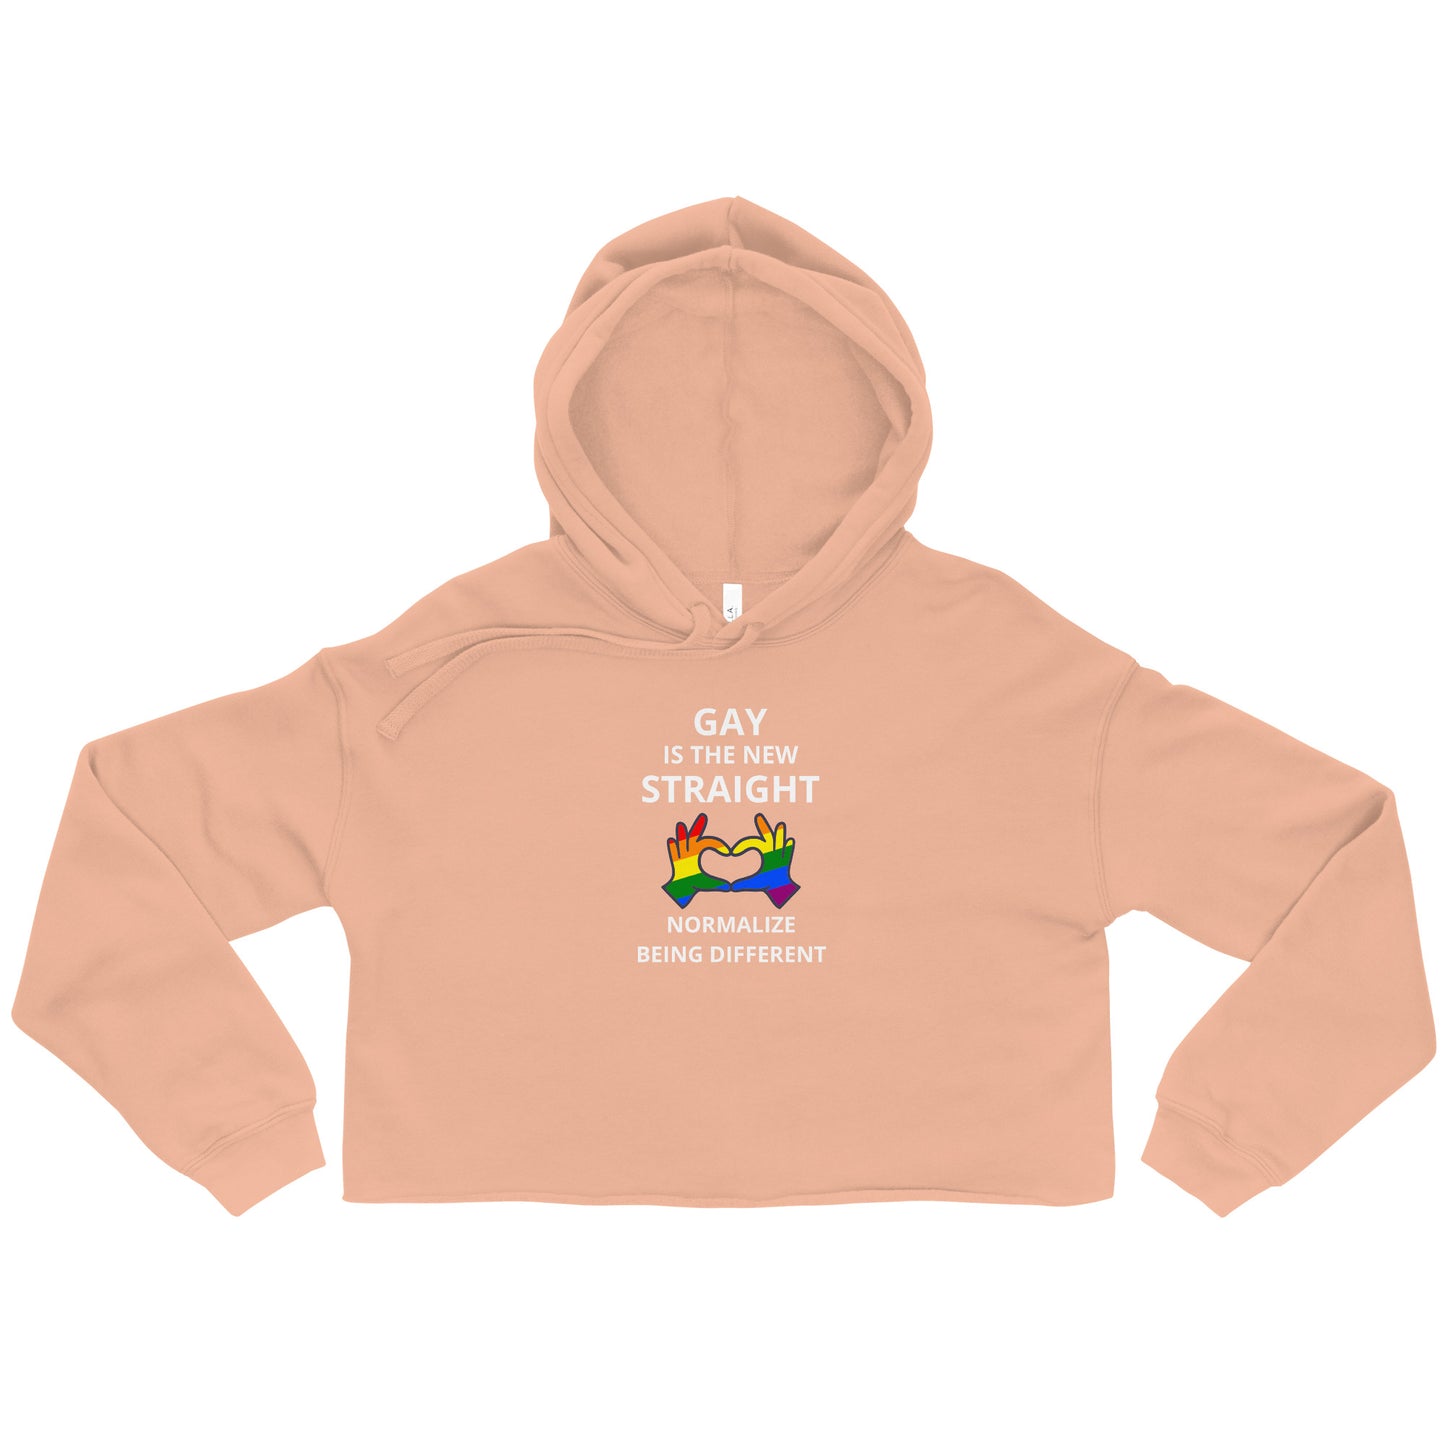 Gay Is The New Straight Lettered Crop Hoodie W/ Normalize Being Different